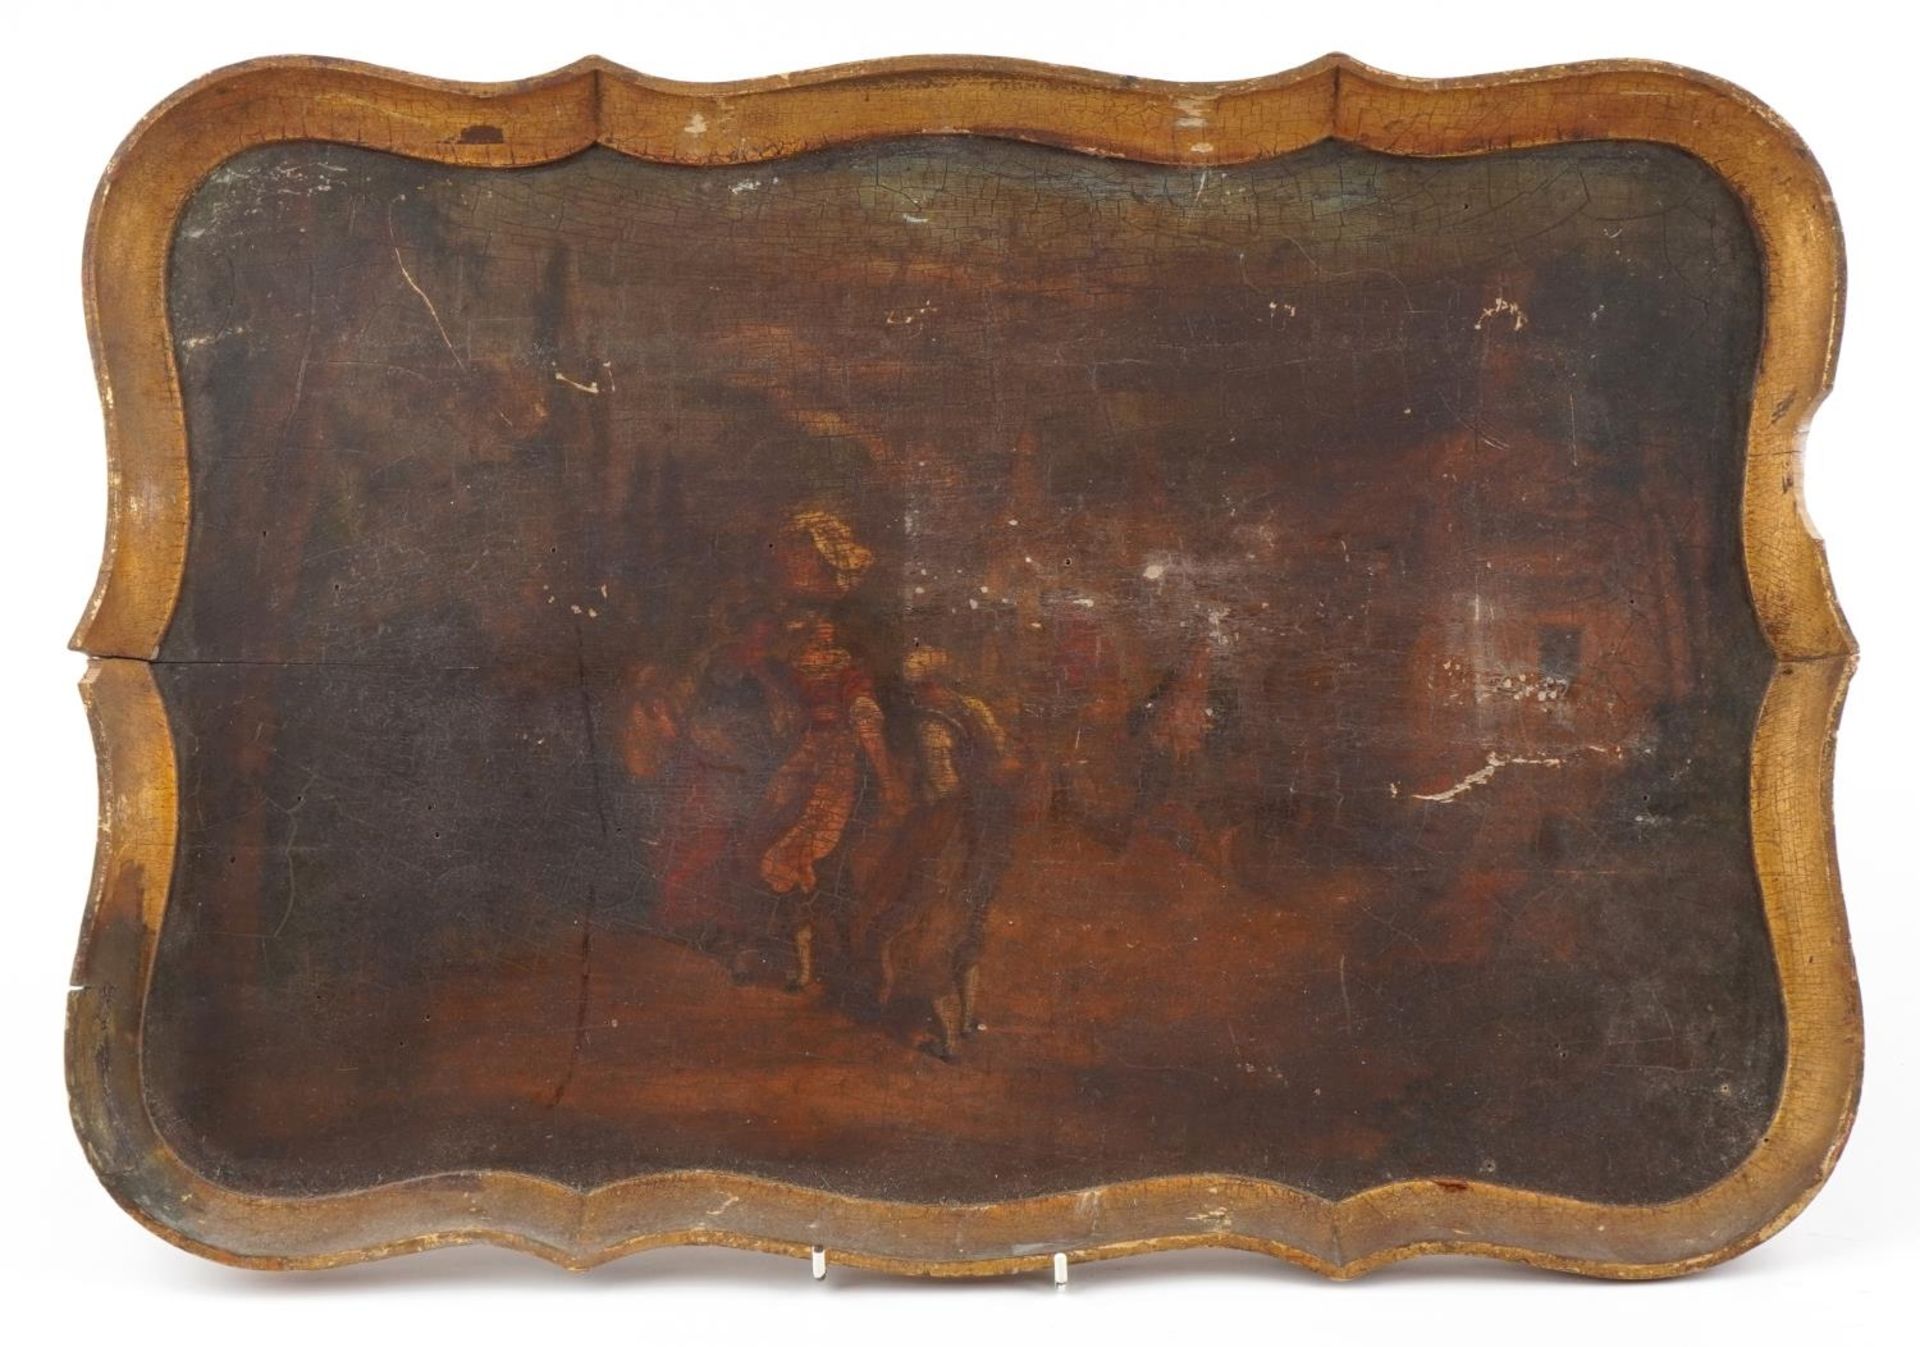 Antique wooden tray hand painted with figures in a village, 64cm x 44cm : For further information on